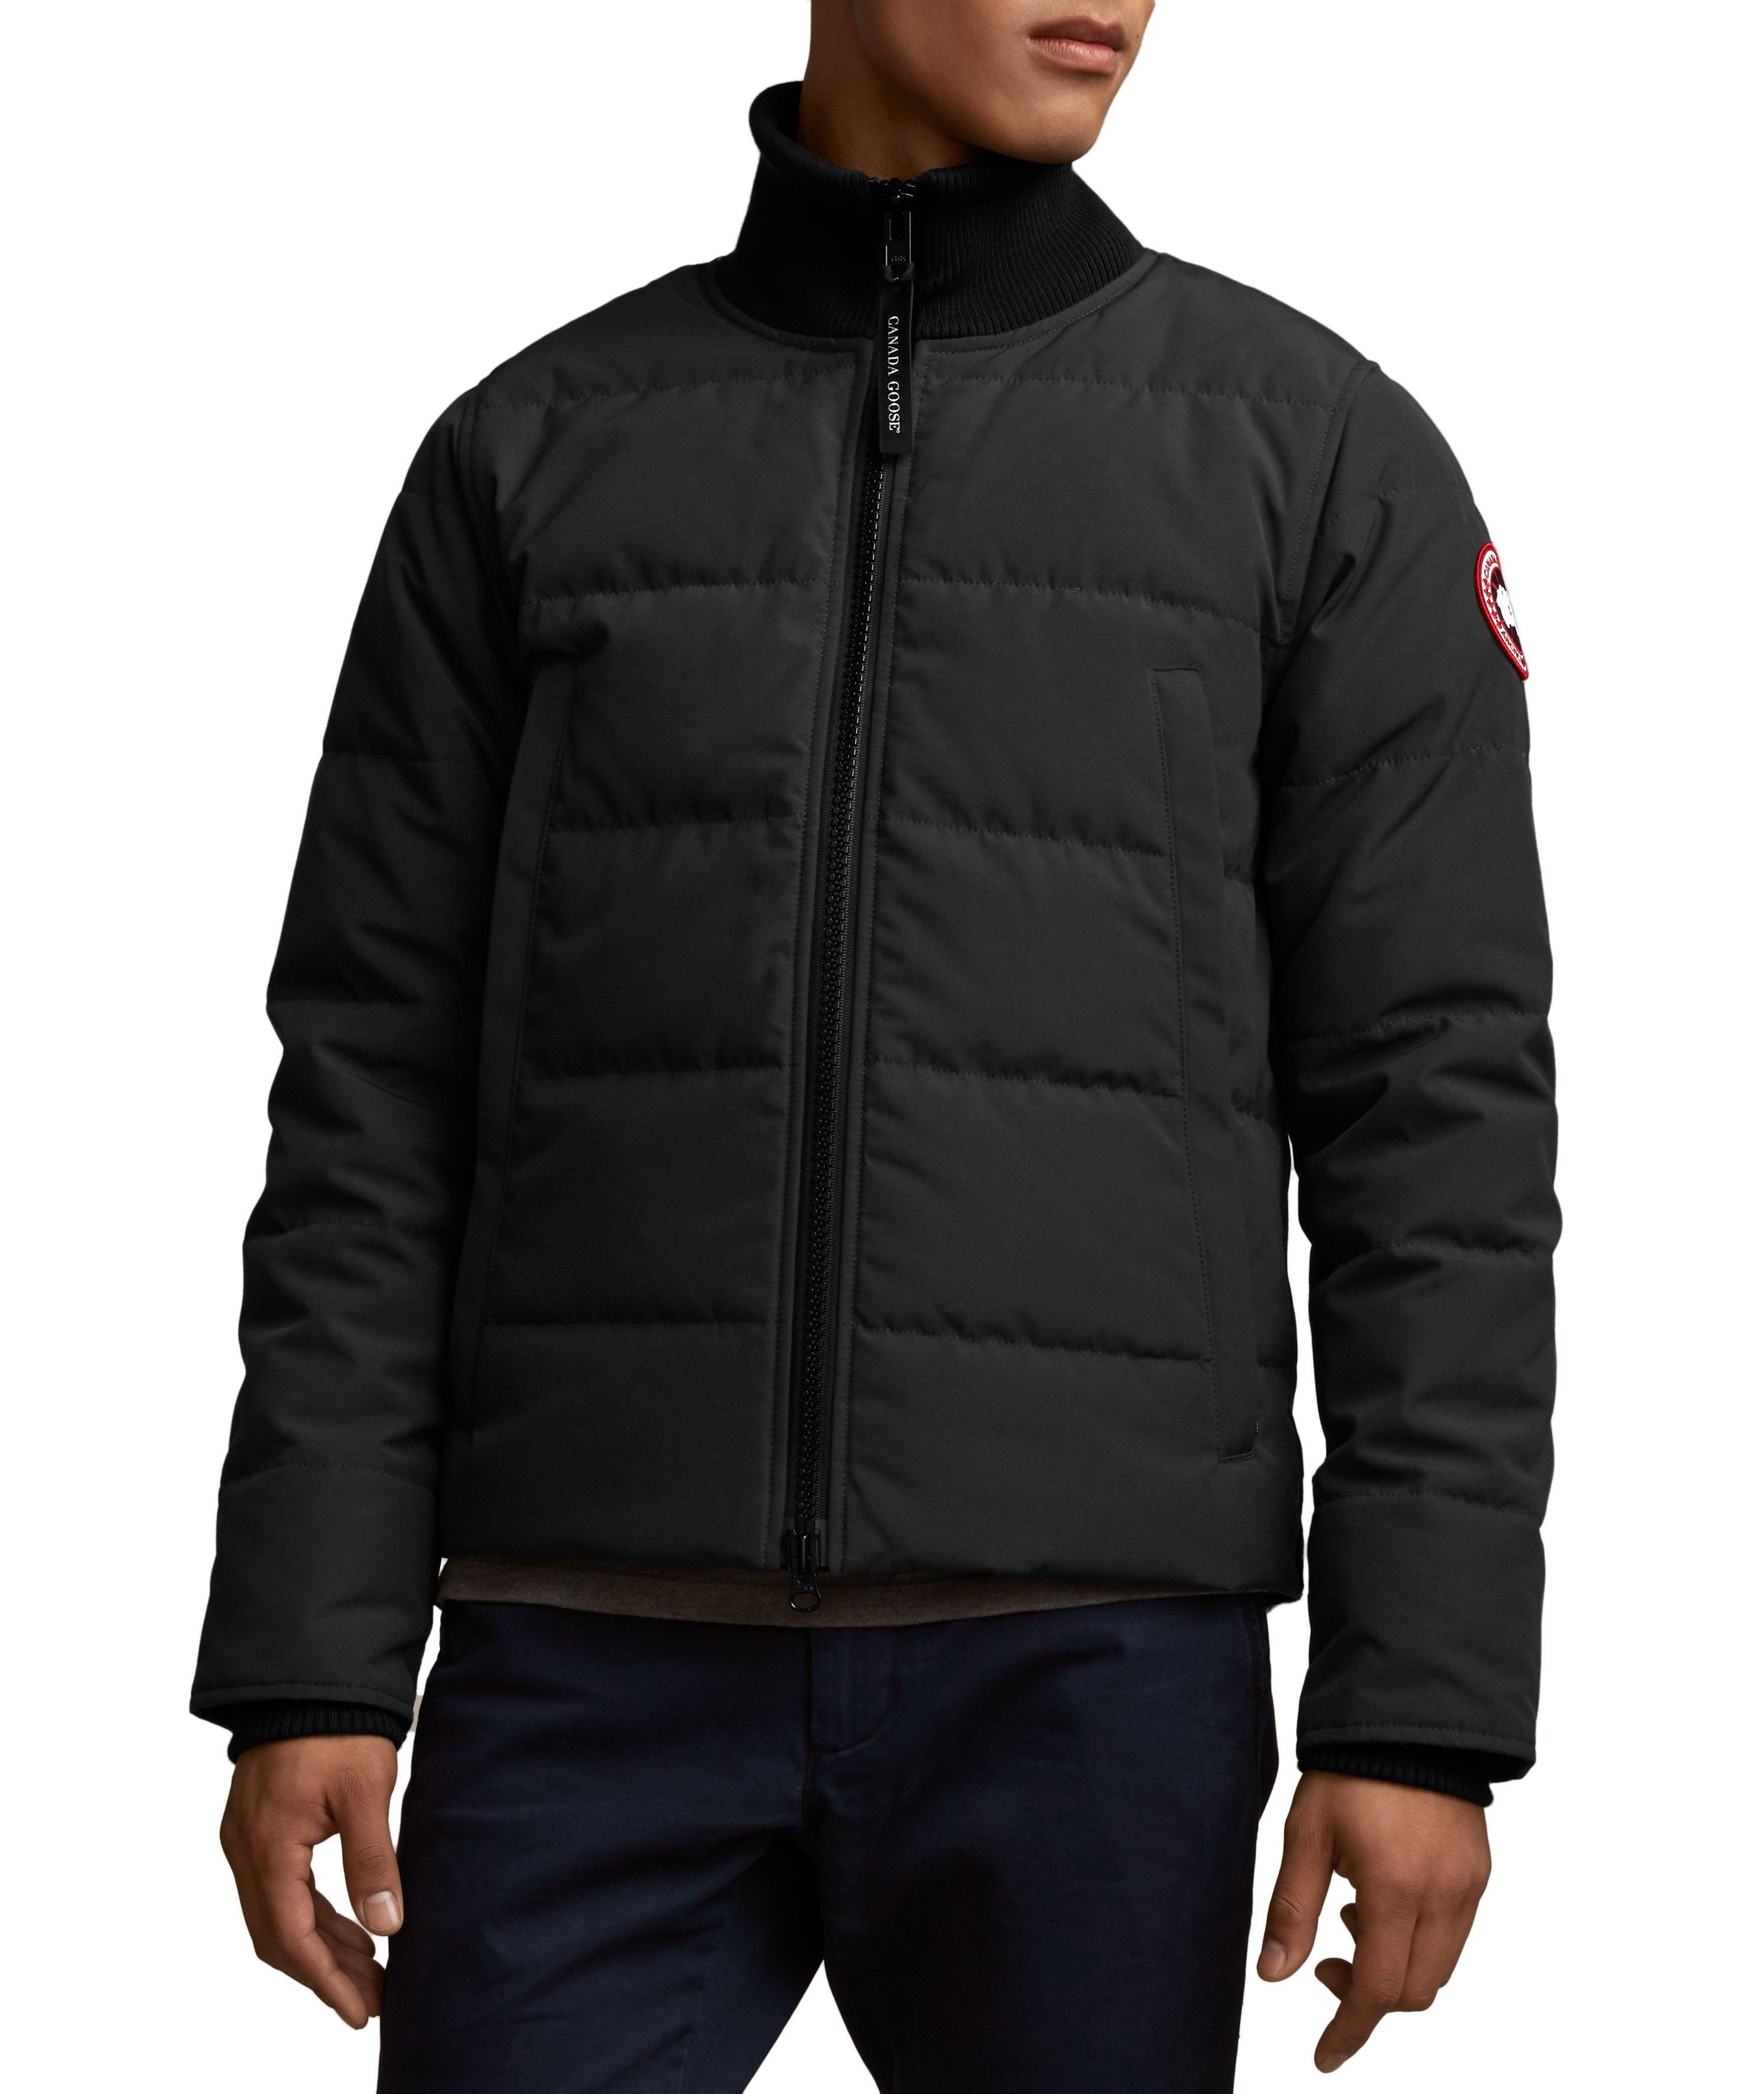 Woolford Jacket Fusion Fit image 0